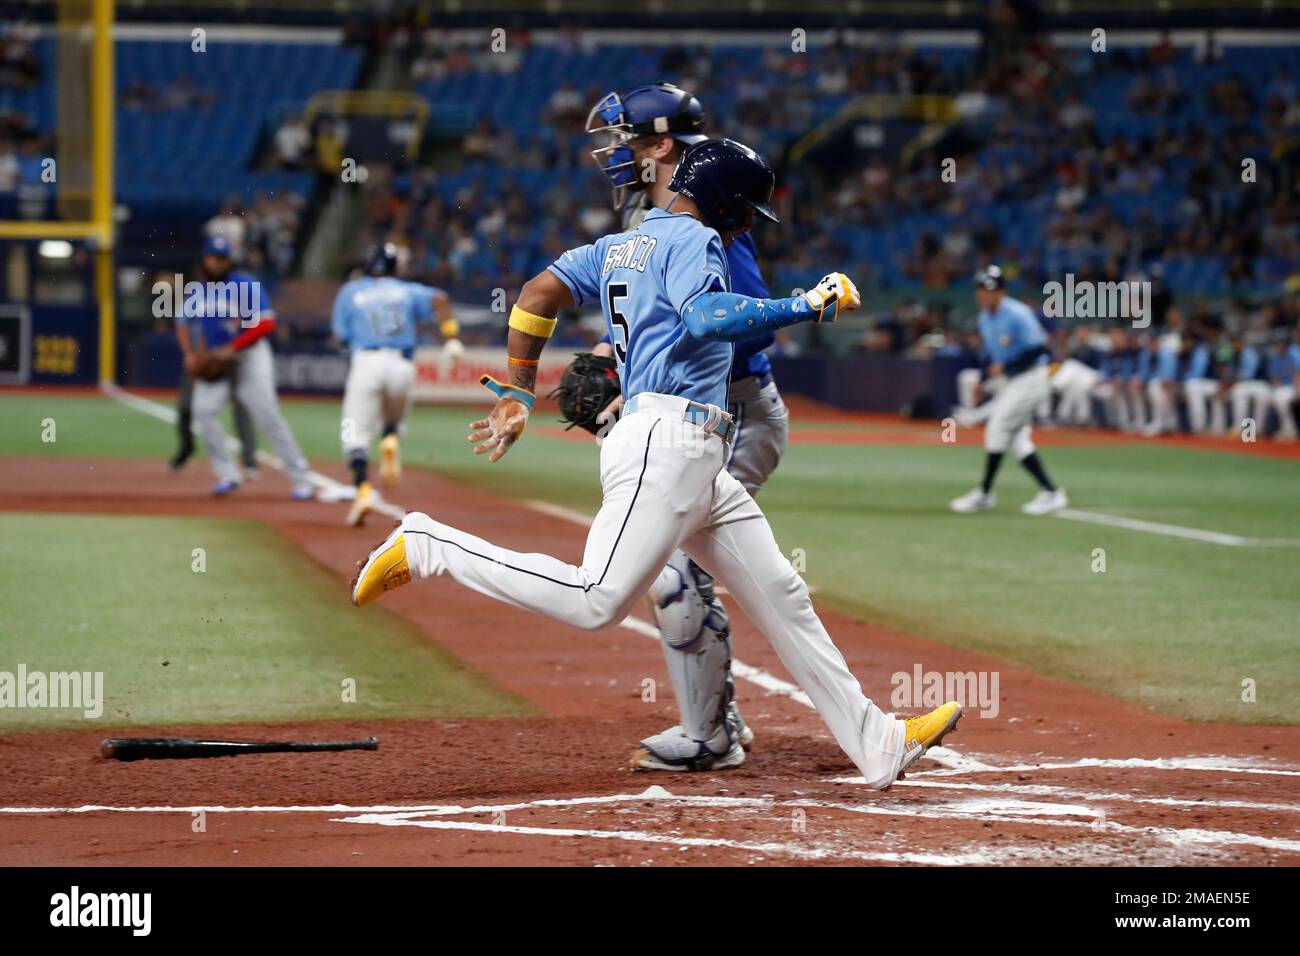 Tampa Bay Rays' Wander Franco scores against the Toronto Blue Jays